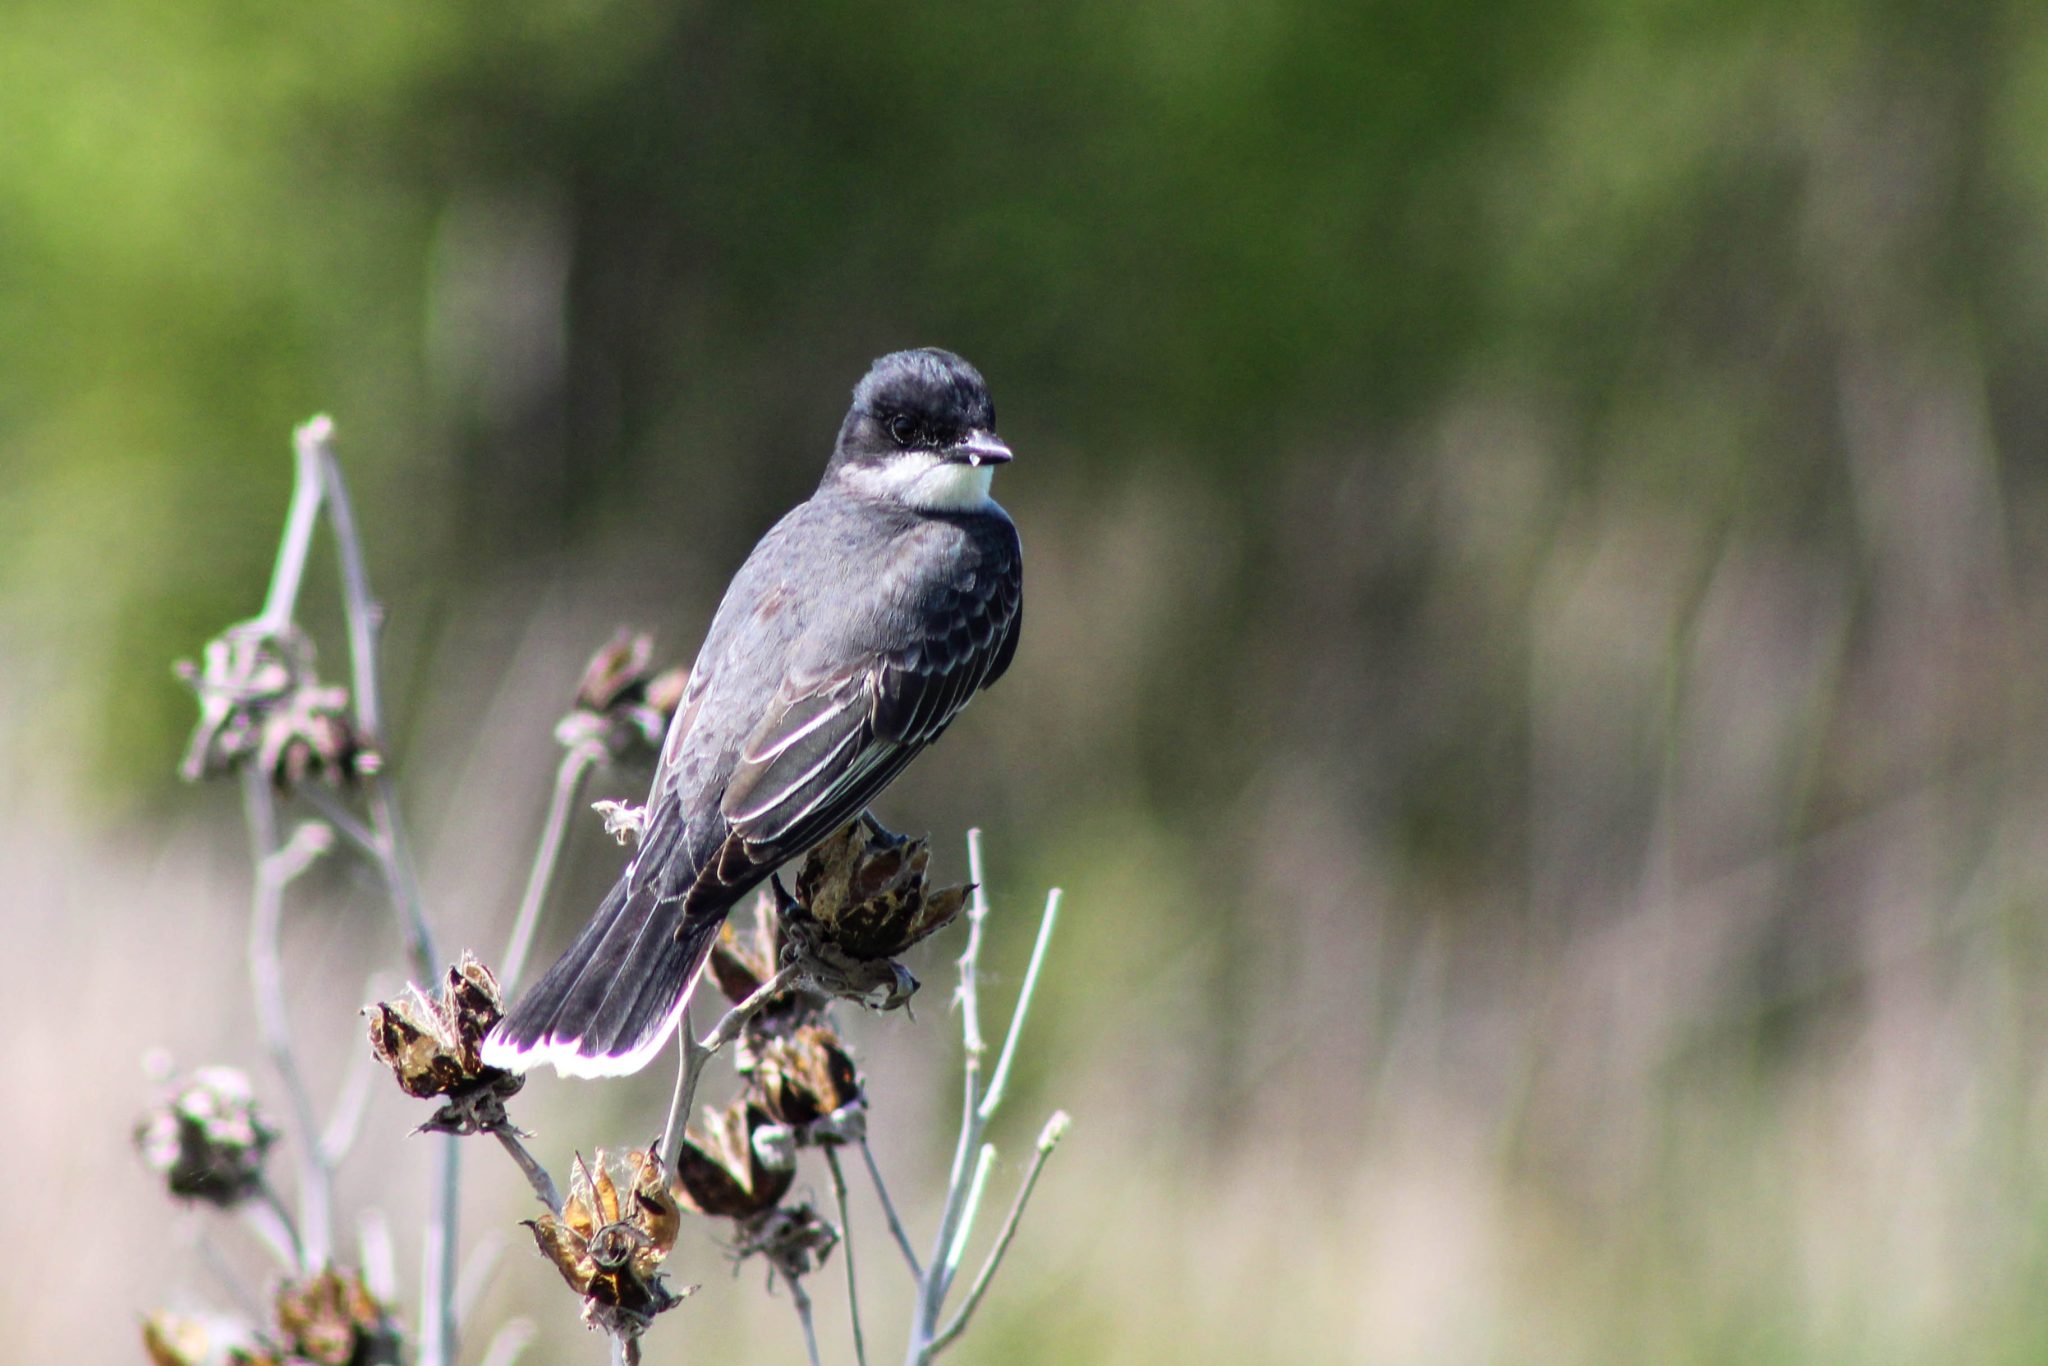 An eastern kingbird perches on a dried branch at a wildlife refuge in Central New York.